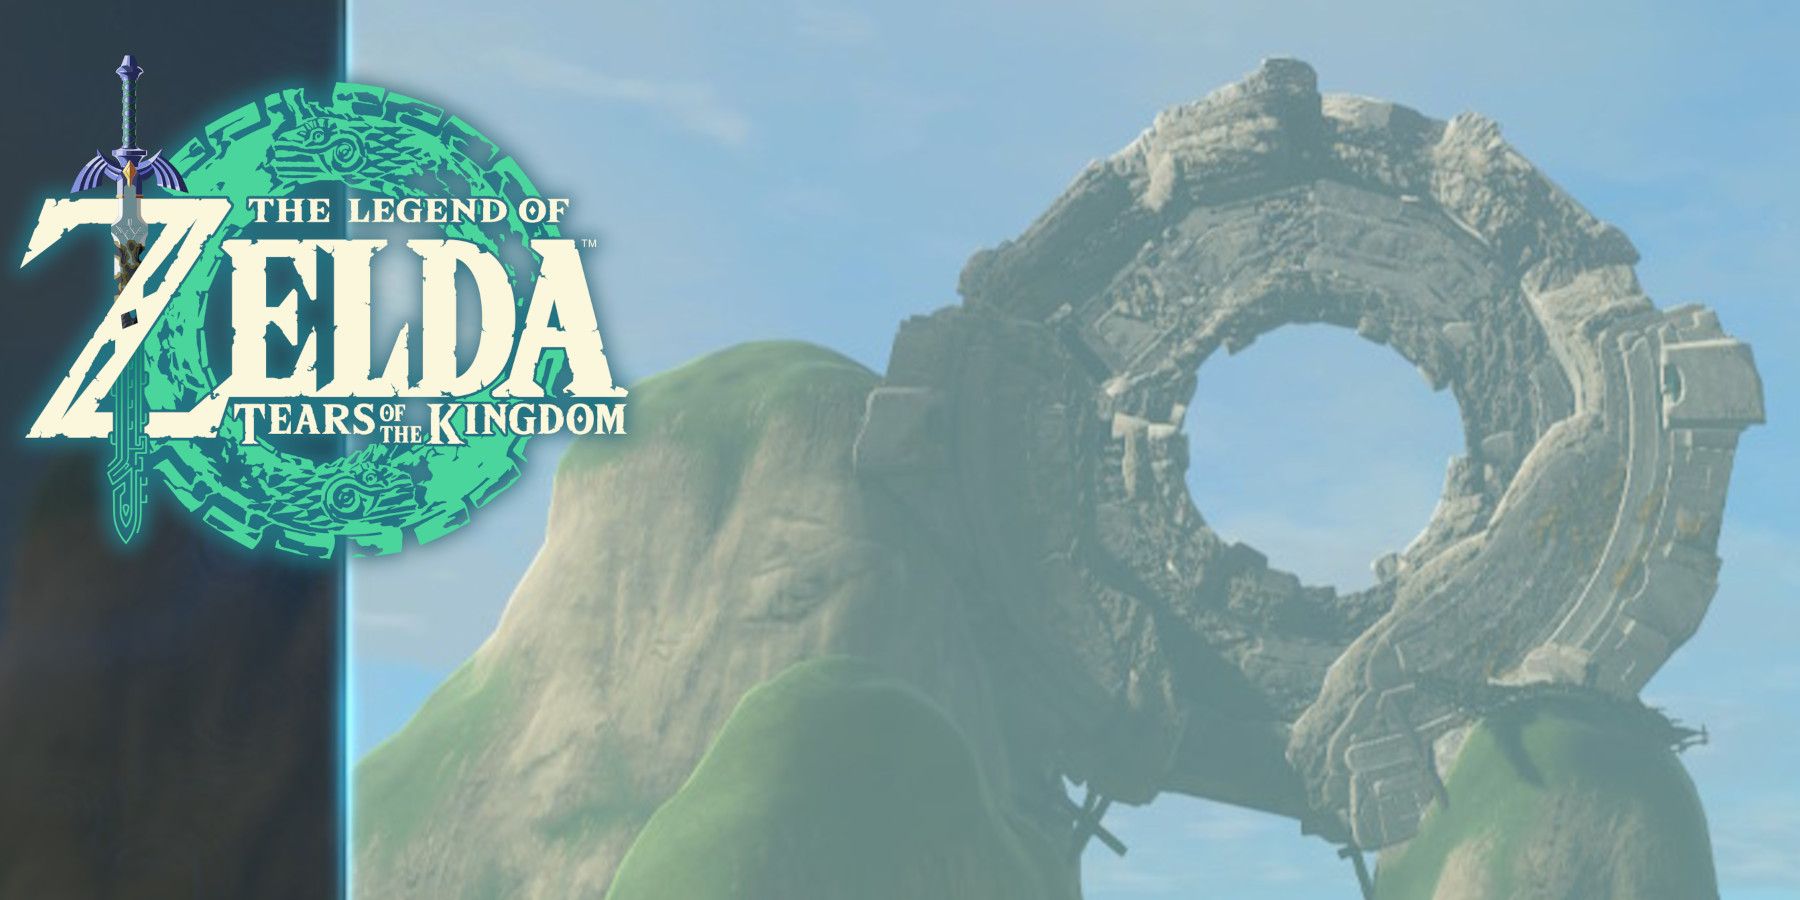 Five things to look forward to in “The Legend of Zelda: Tears of the Kingdom”  – The Foothill Dragon Press